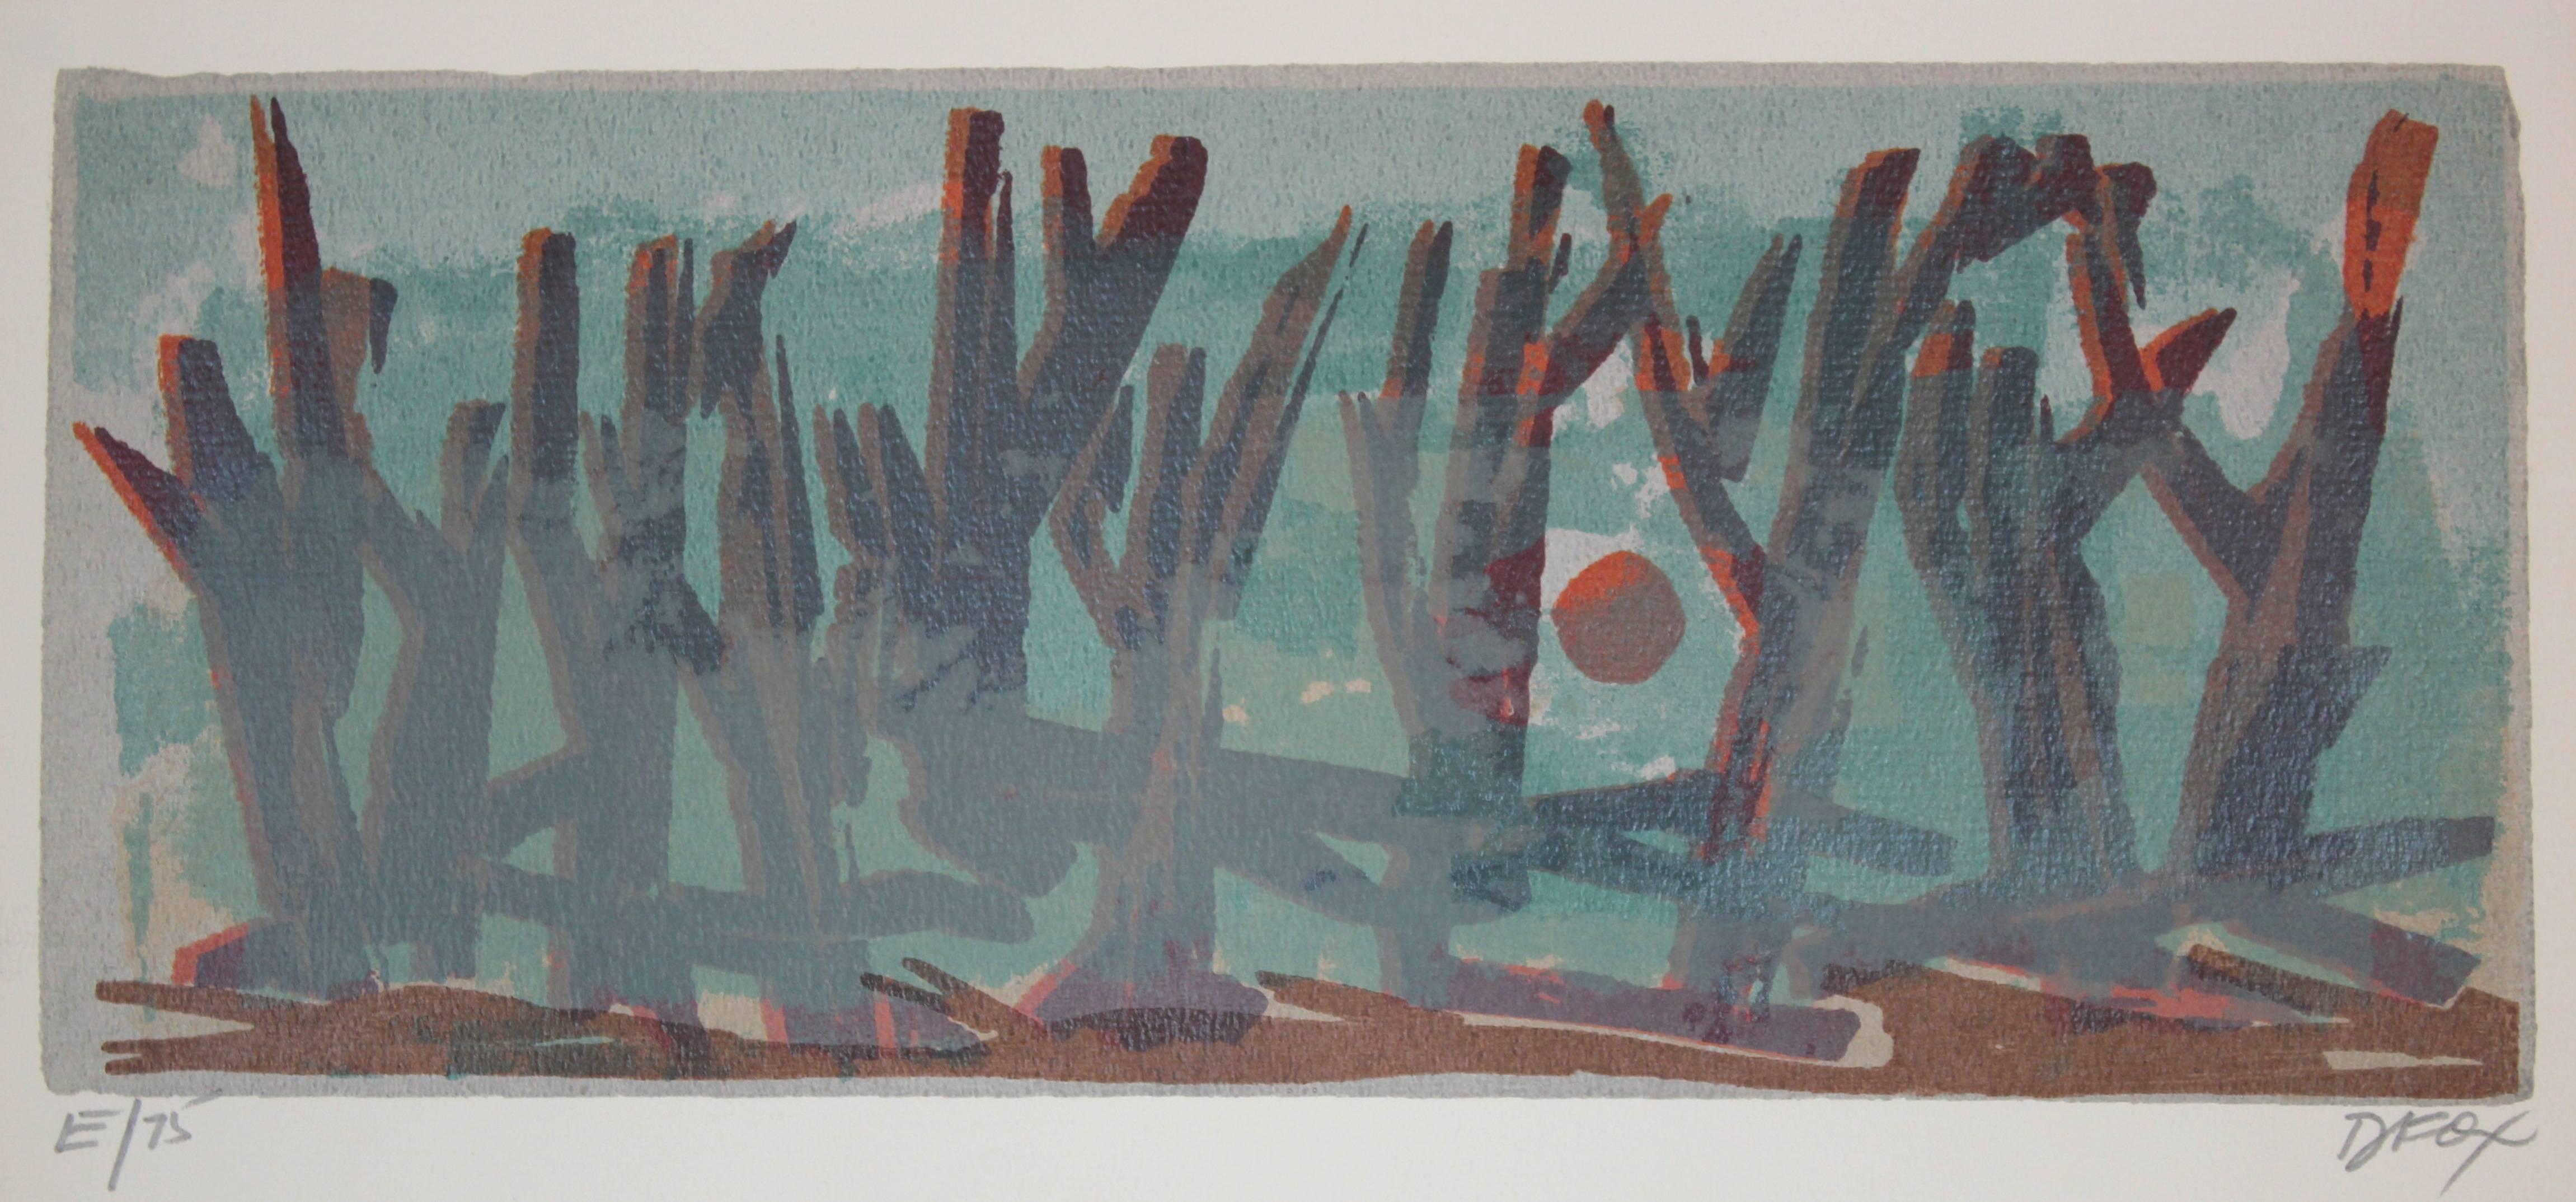 Dave Fox Landscape Print - Forest and Moon Through Fog, Serigraph on Paper, Late 20th Century